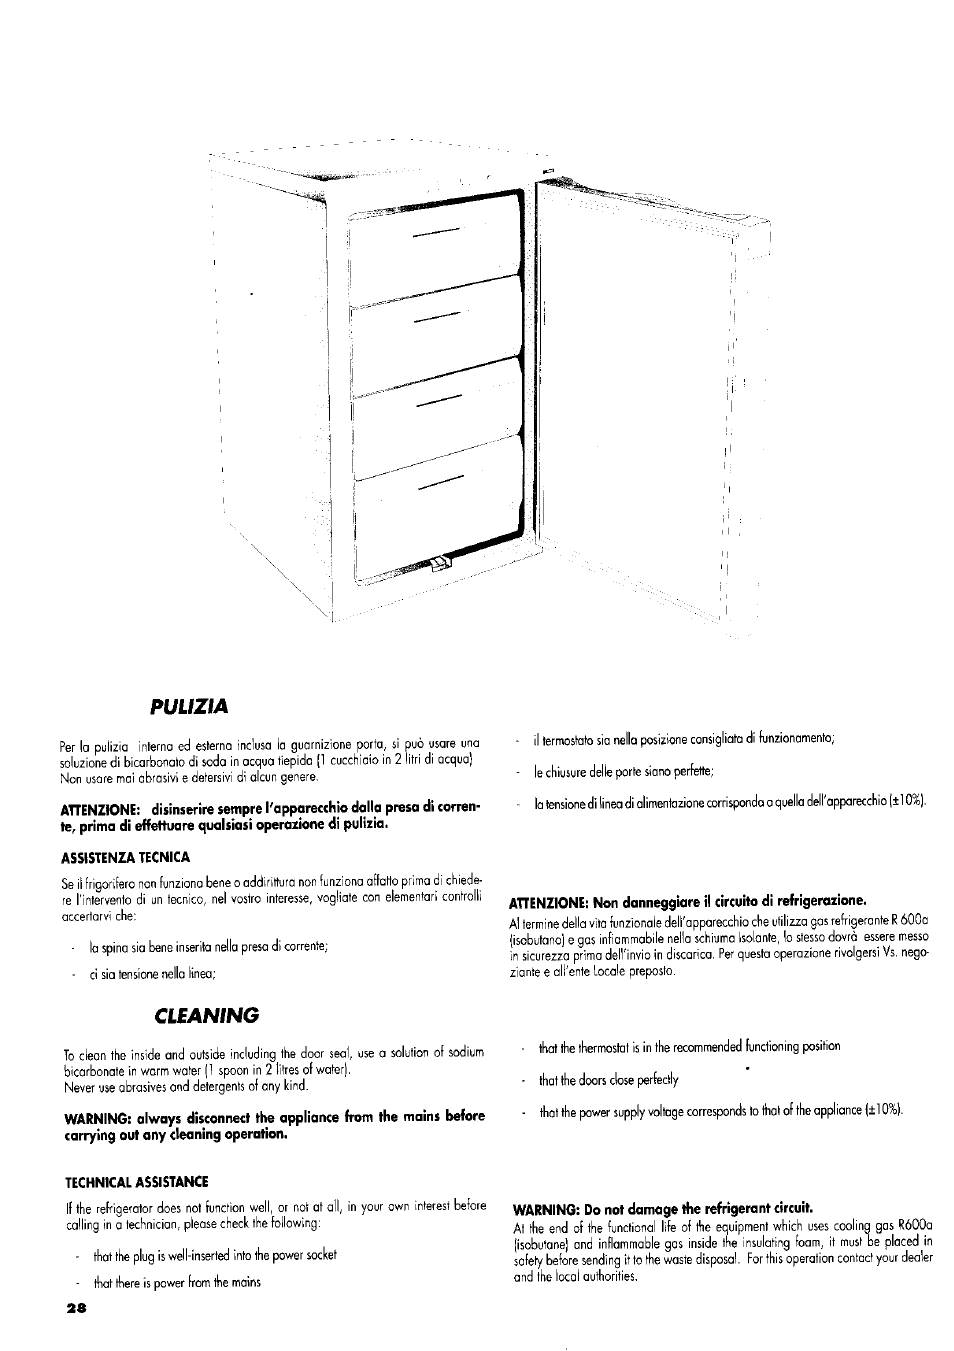 Pulizia, Assistenza tecnica, Cleaning | Technical assistance, Warning: do not damage the refrigerant circuit | ZANKER GS 105 User Manual | Page 28 / 31